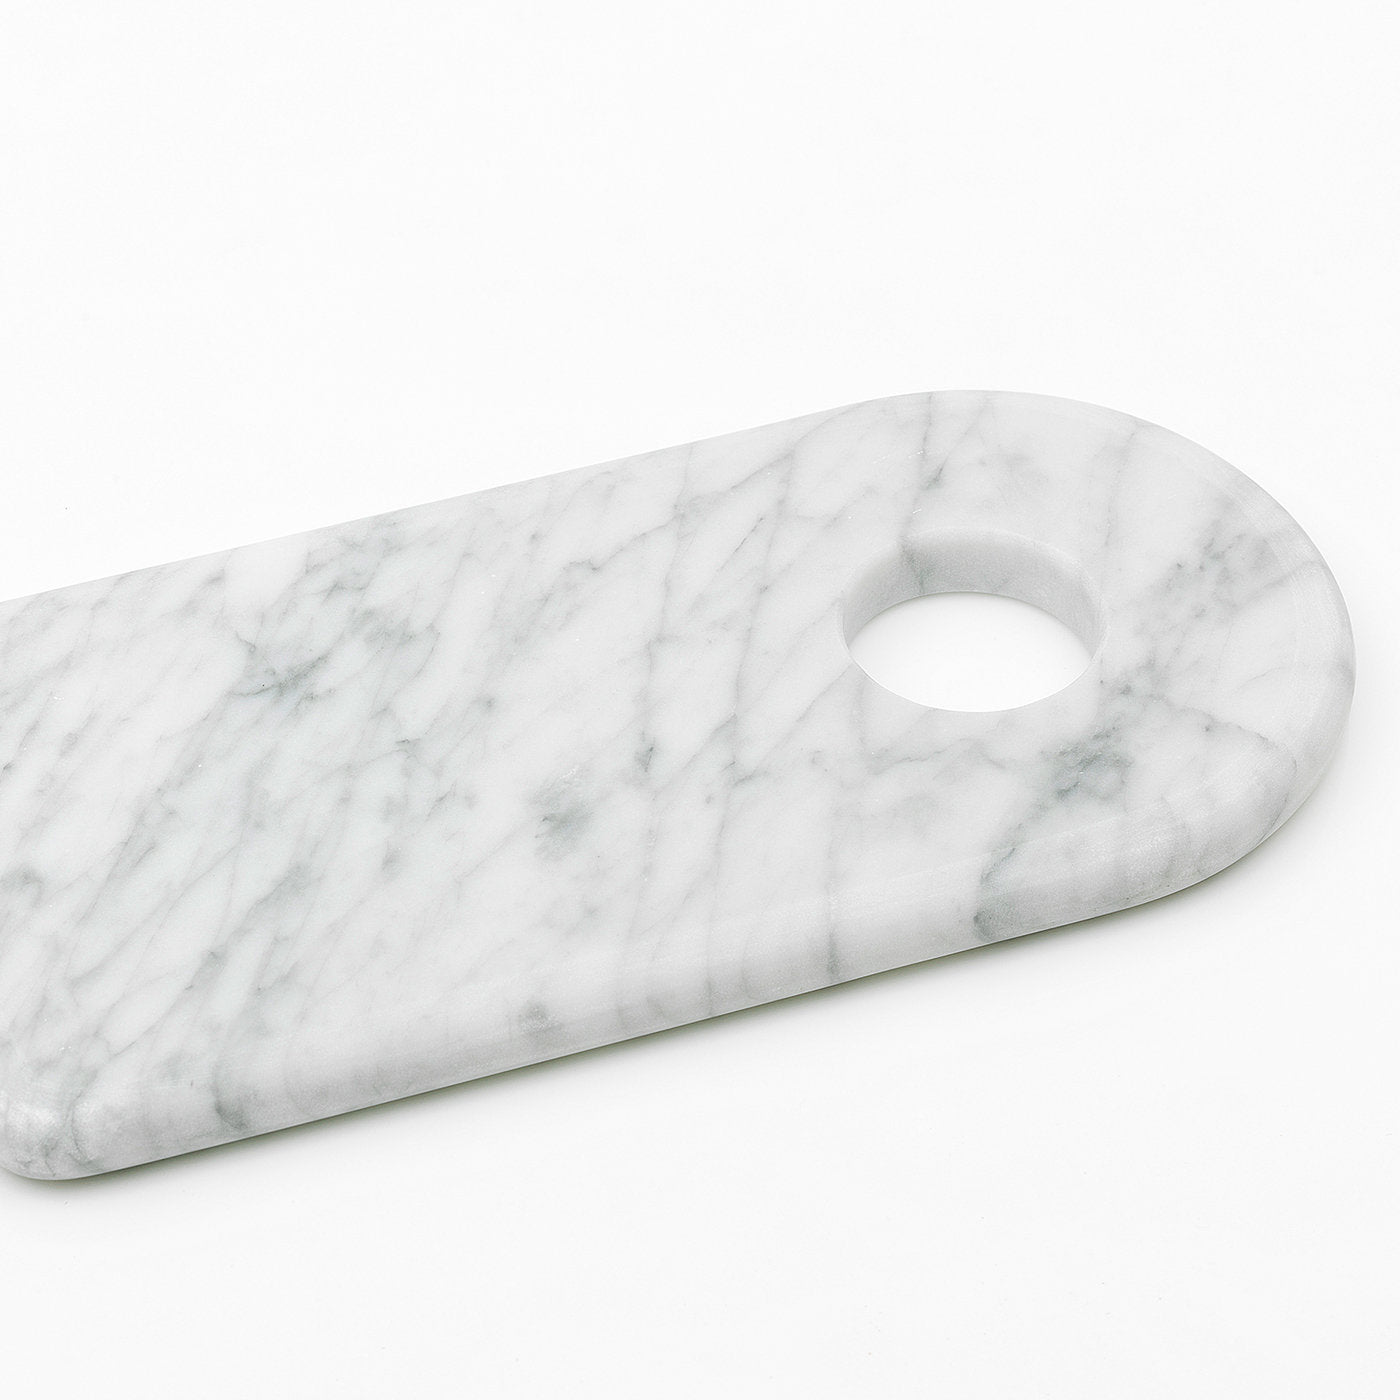 White Marble Cutting Board with Hole - Alternative view 1